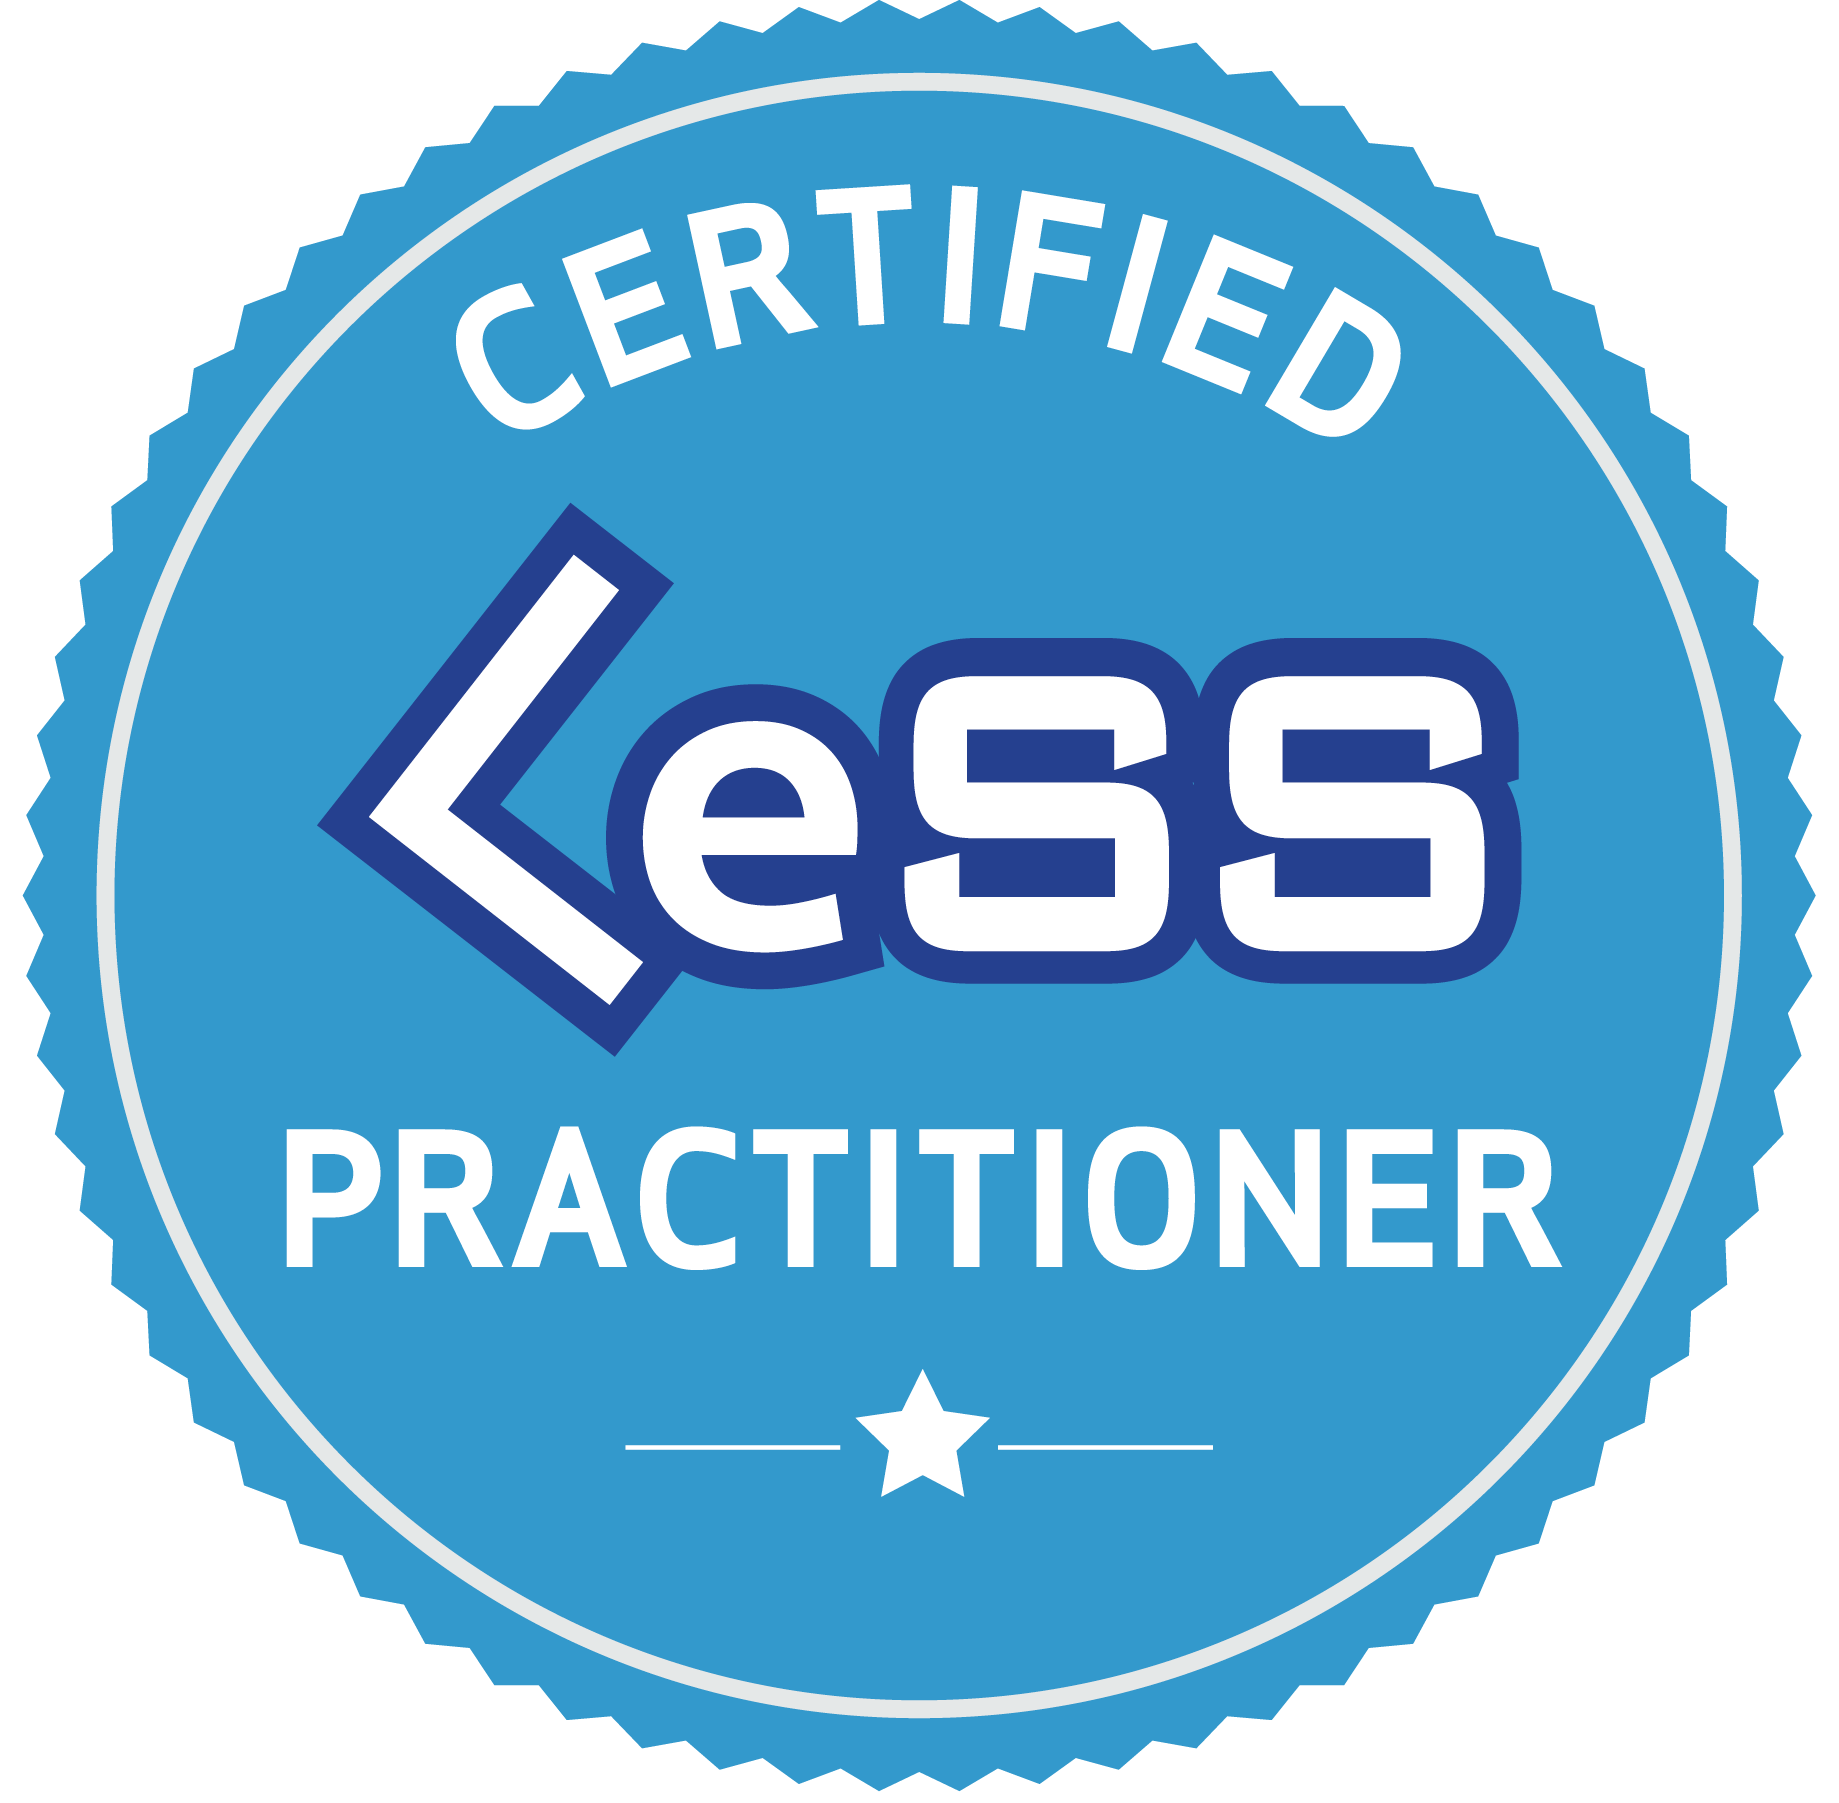 Less Works - Certified LeSS Practitioner